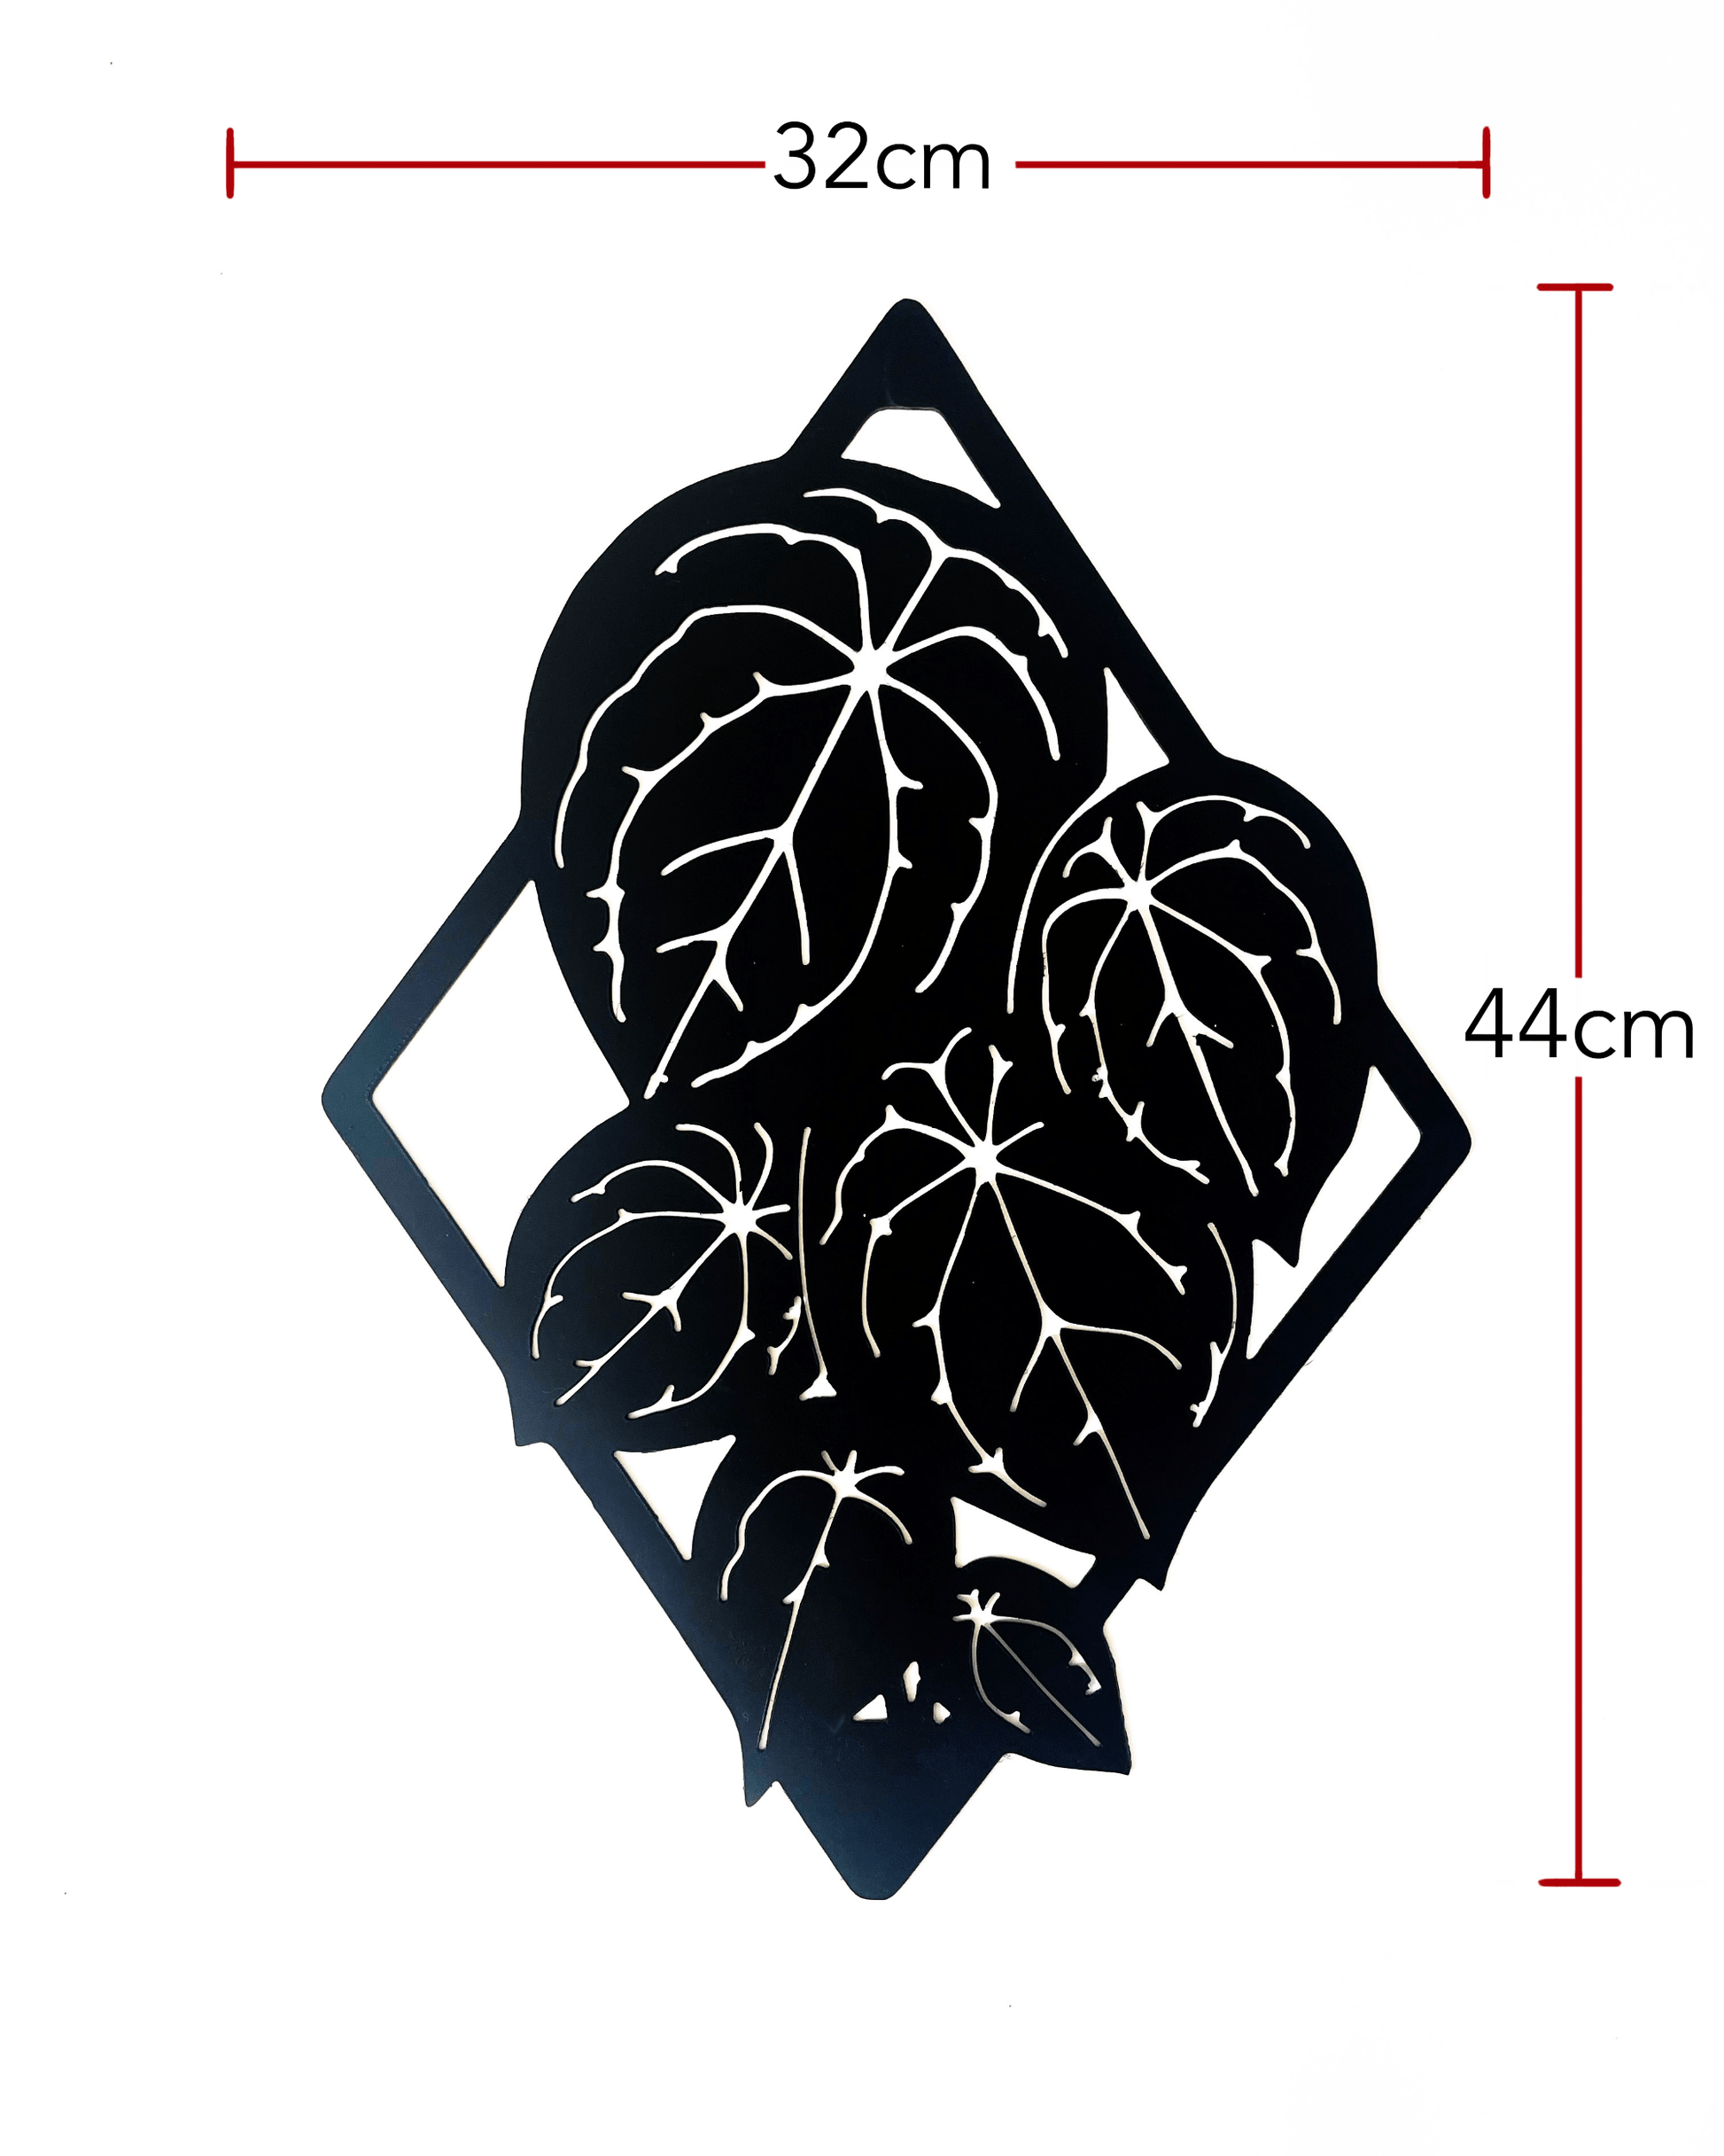 forgetti measurements for anthurium three piece steel metal black wall art silhouette shadow line art design planty gift decor farmhouse greenhouse houseplant jungle iron ivy